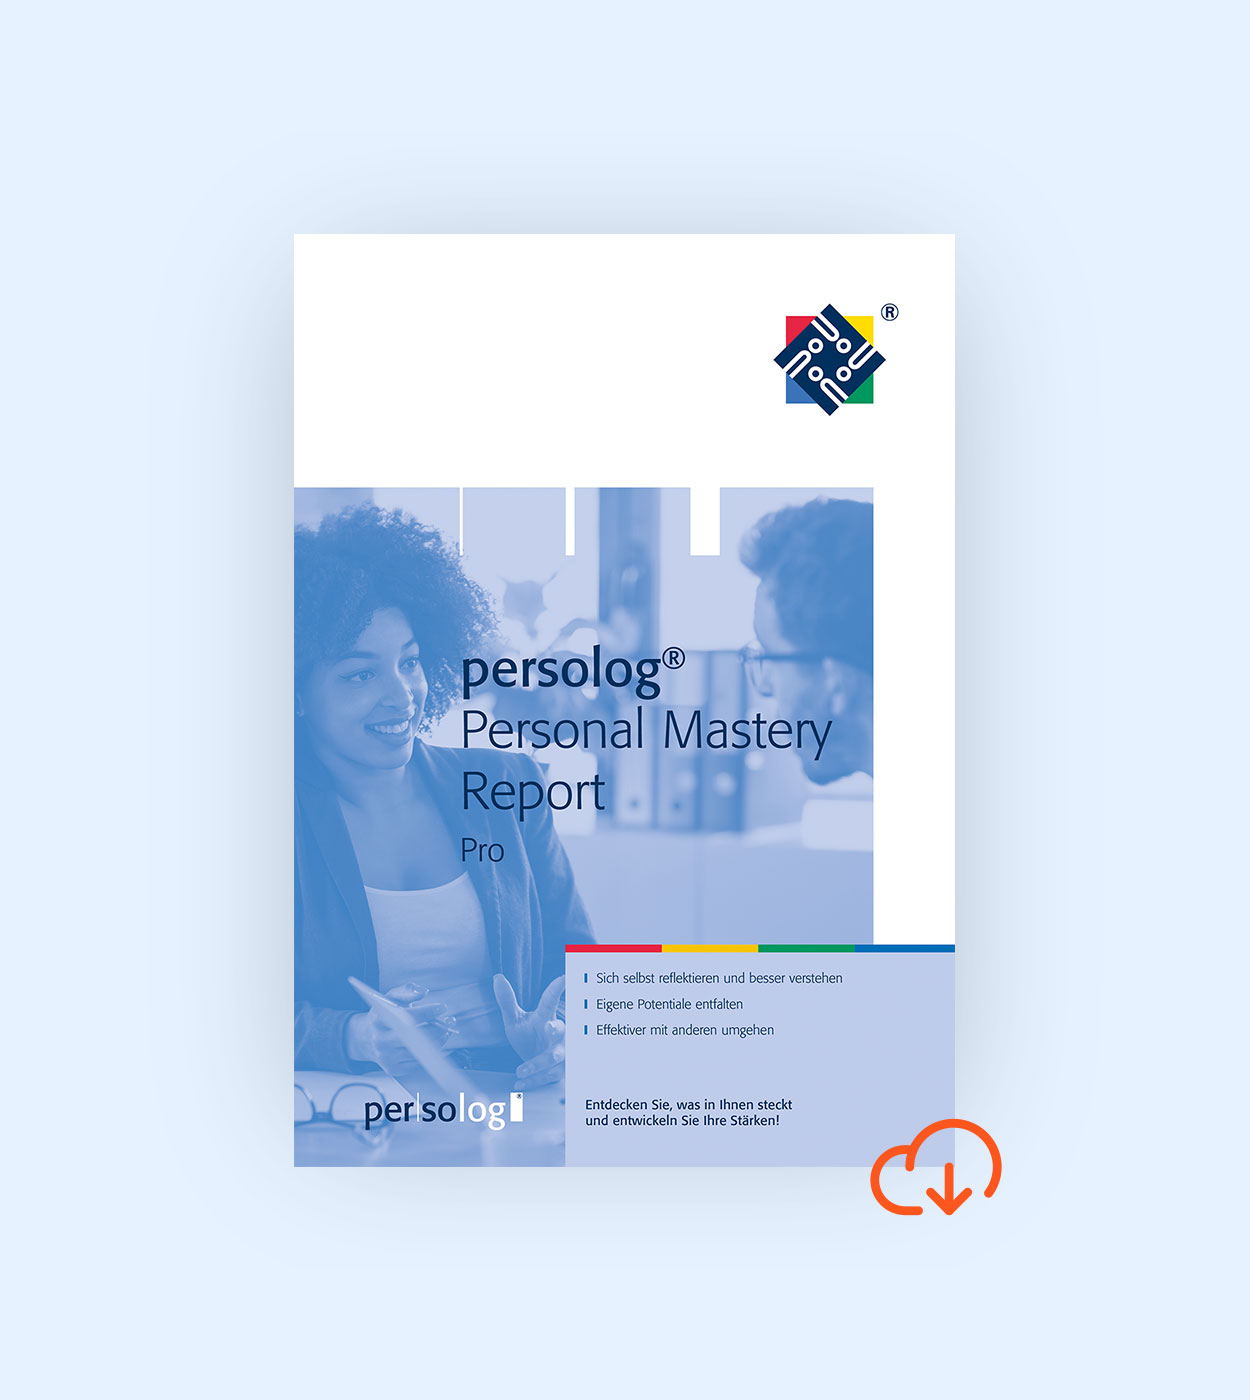 persolog® Personal Mastery Report Pro online